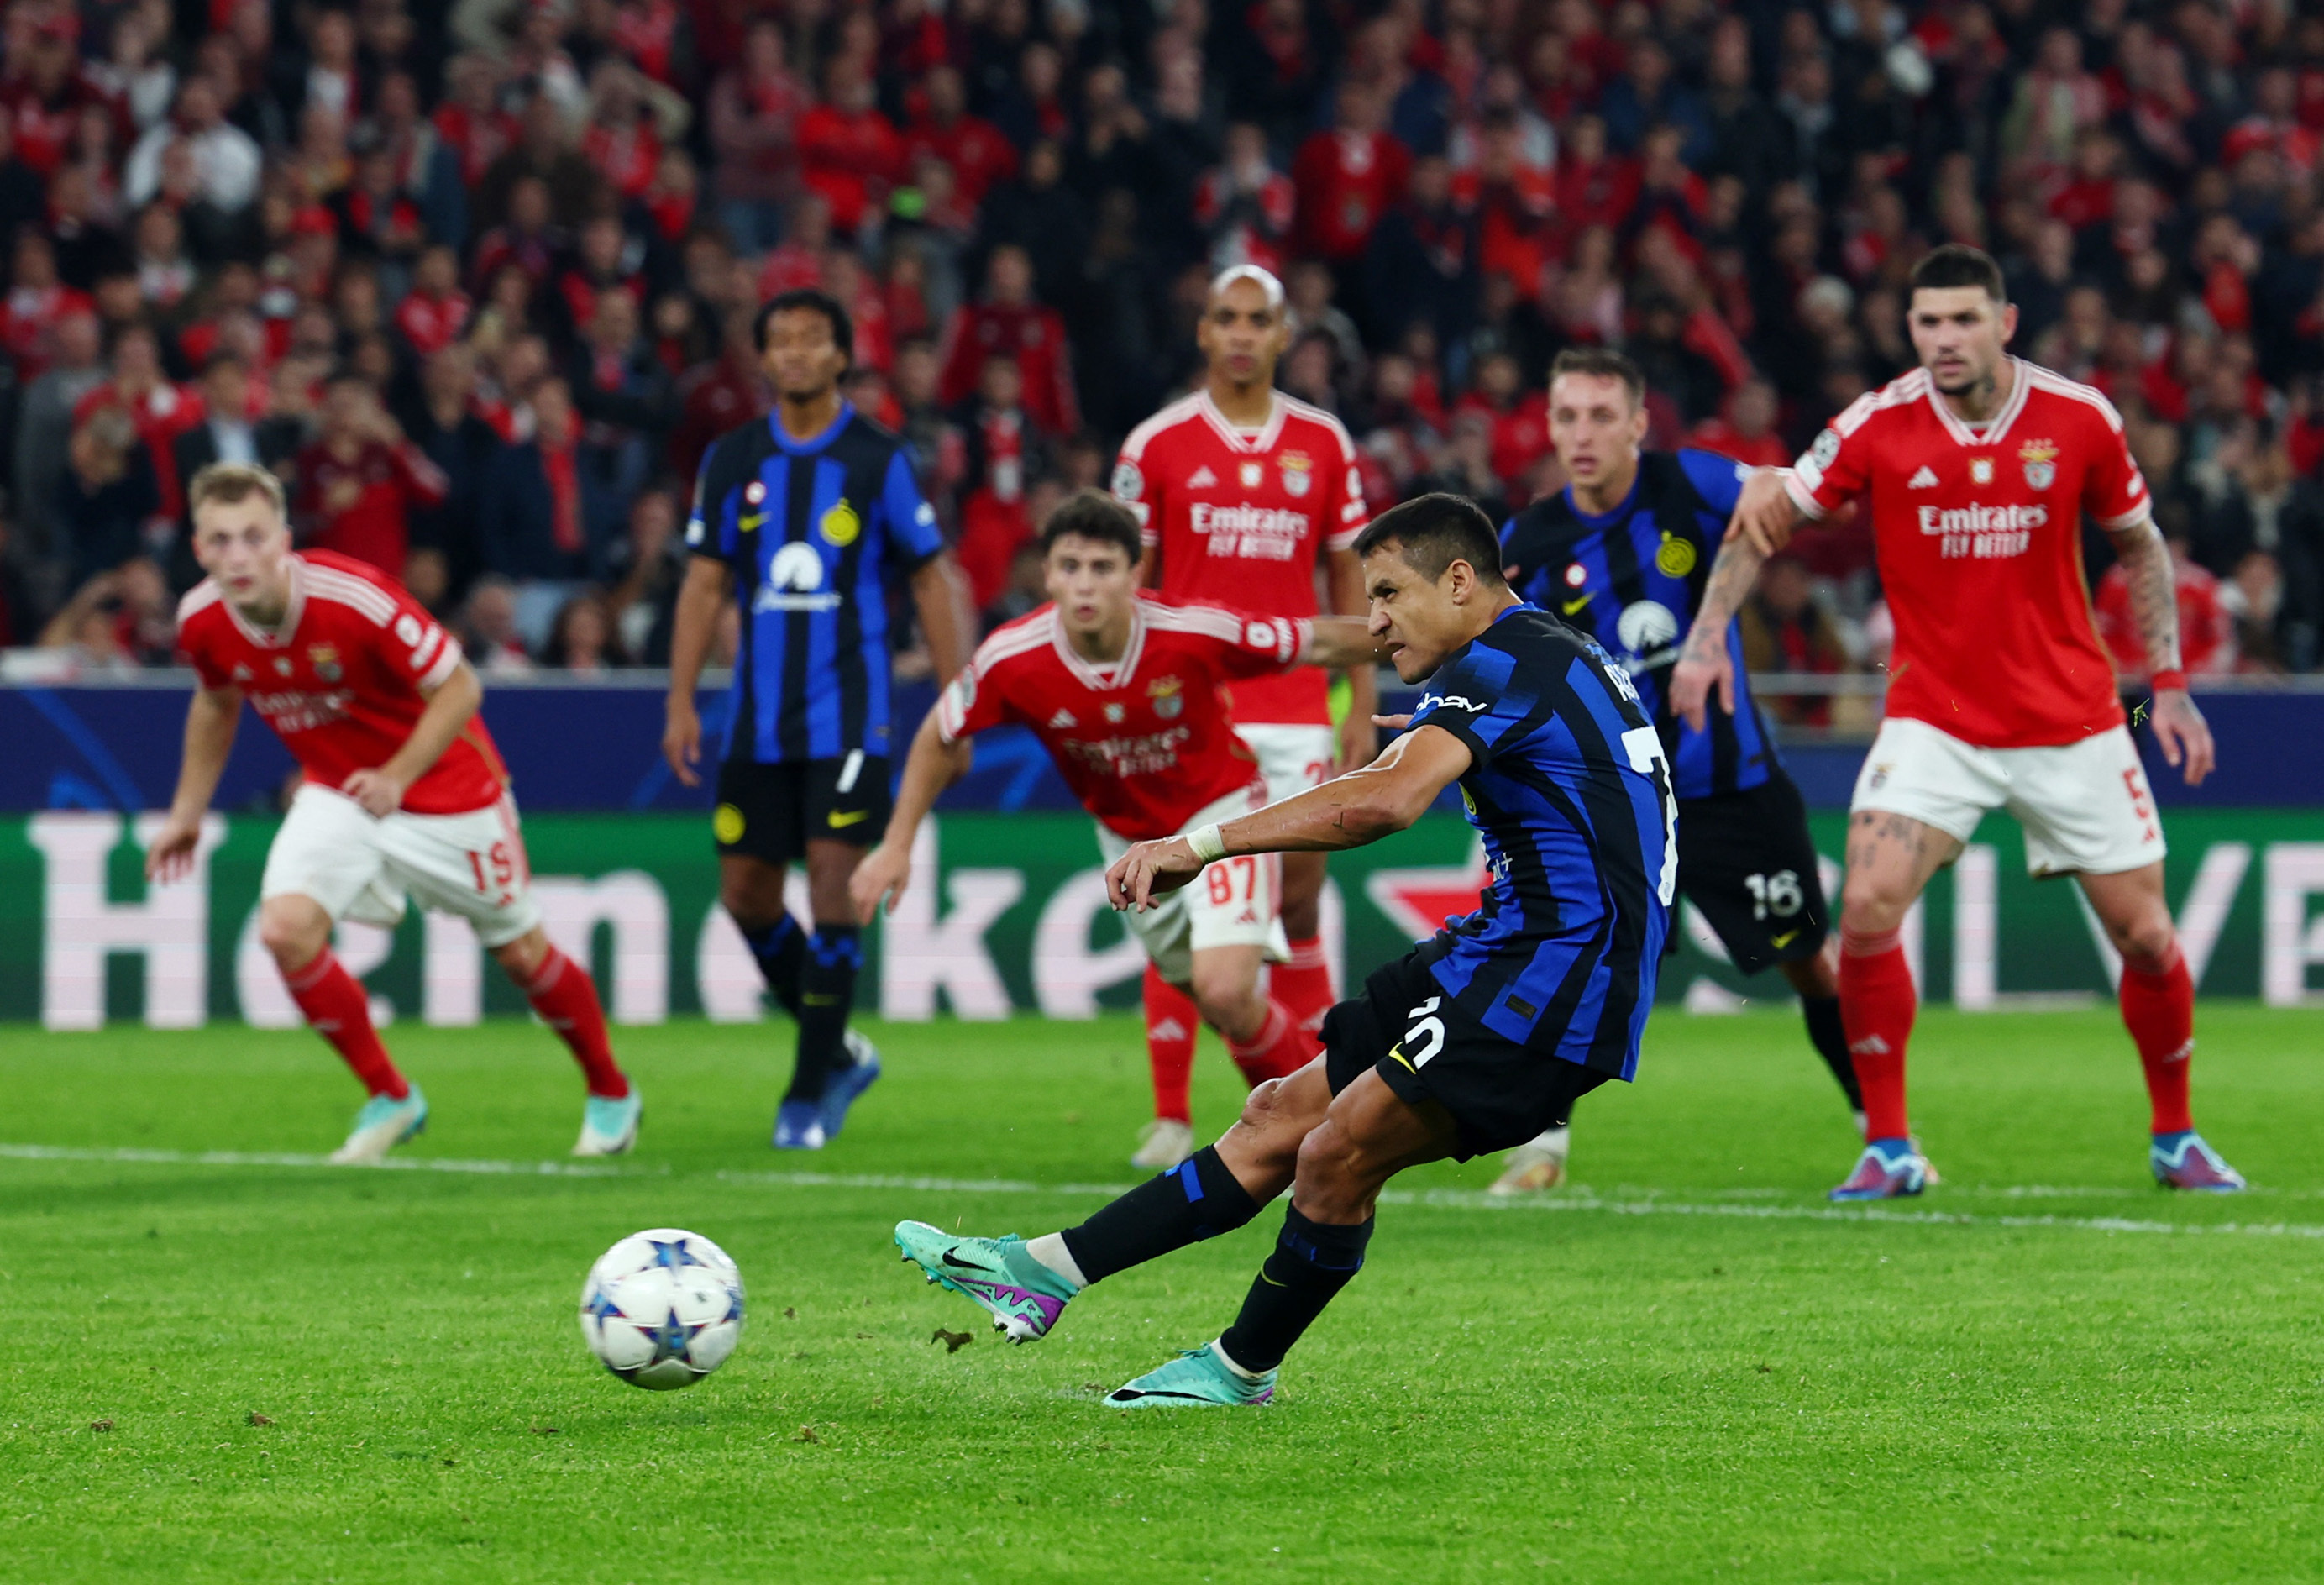 Champions League - Group D - Benfica v Inter Milan